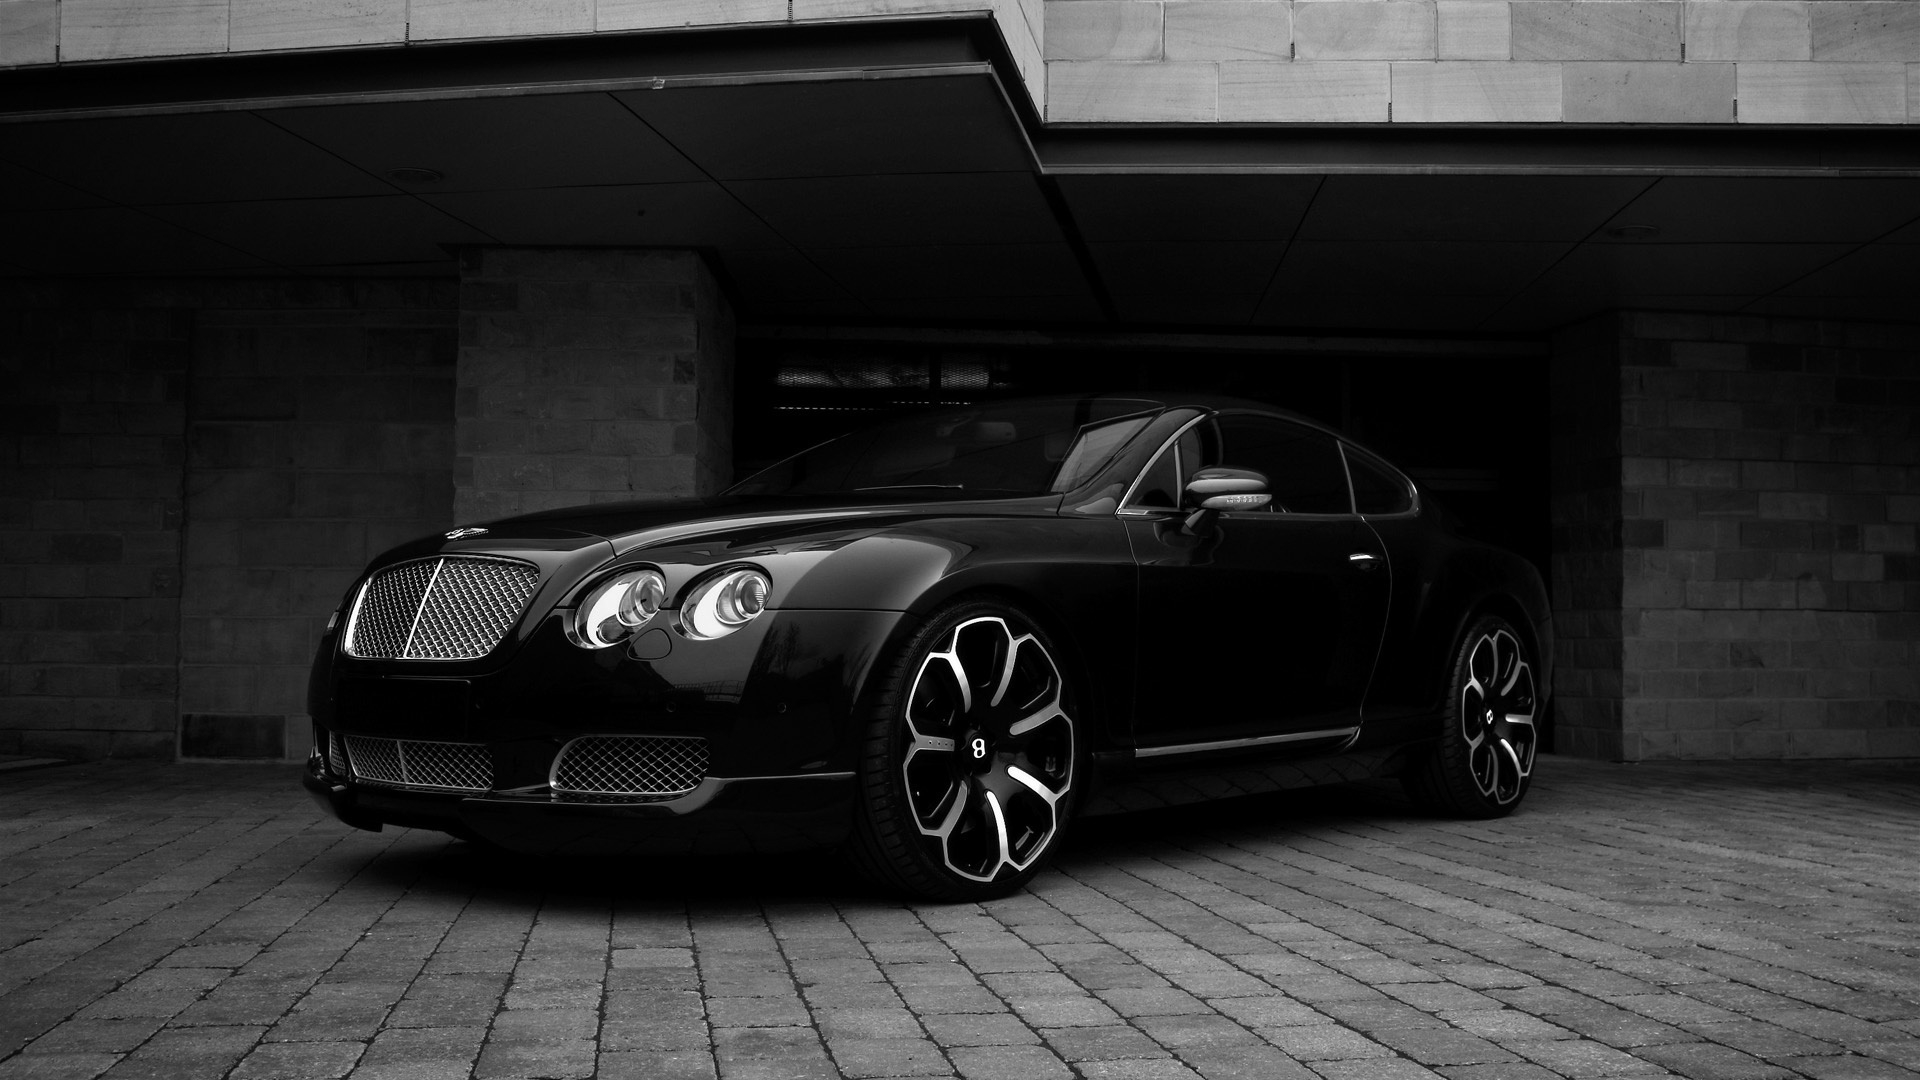 Bentley GTS Black Edition Project Kahn 2008 Overhang for 1920 x 1080 HDTV 1080p resolution